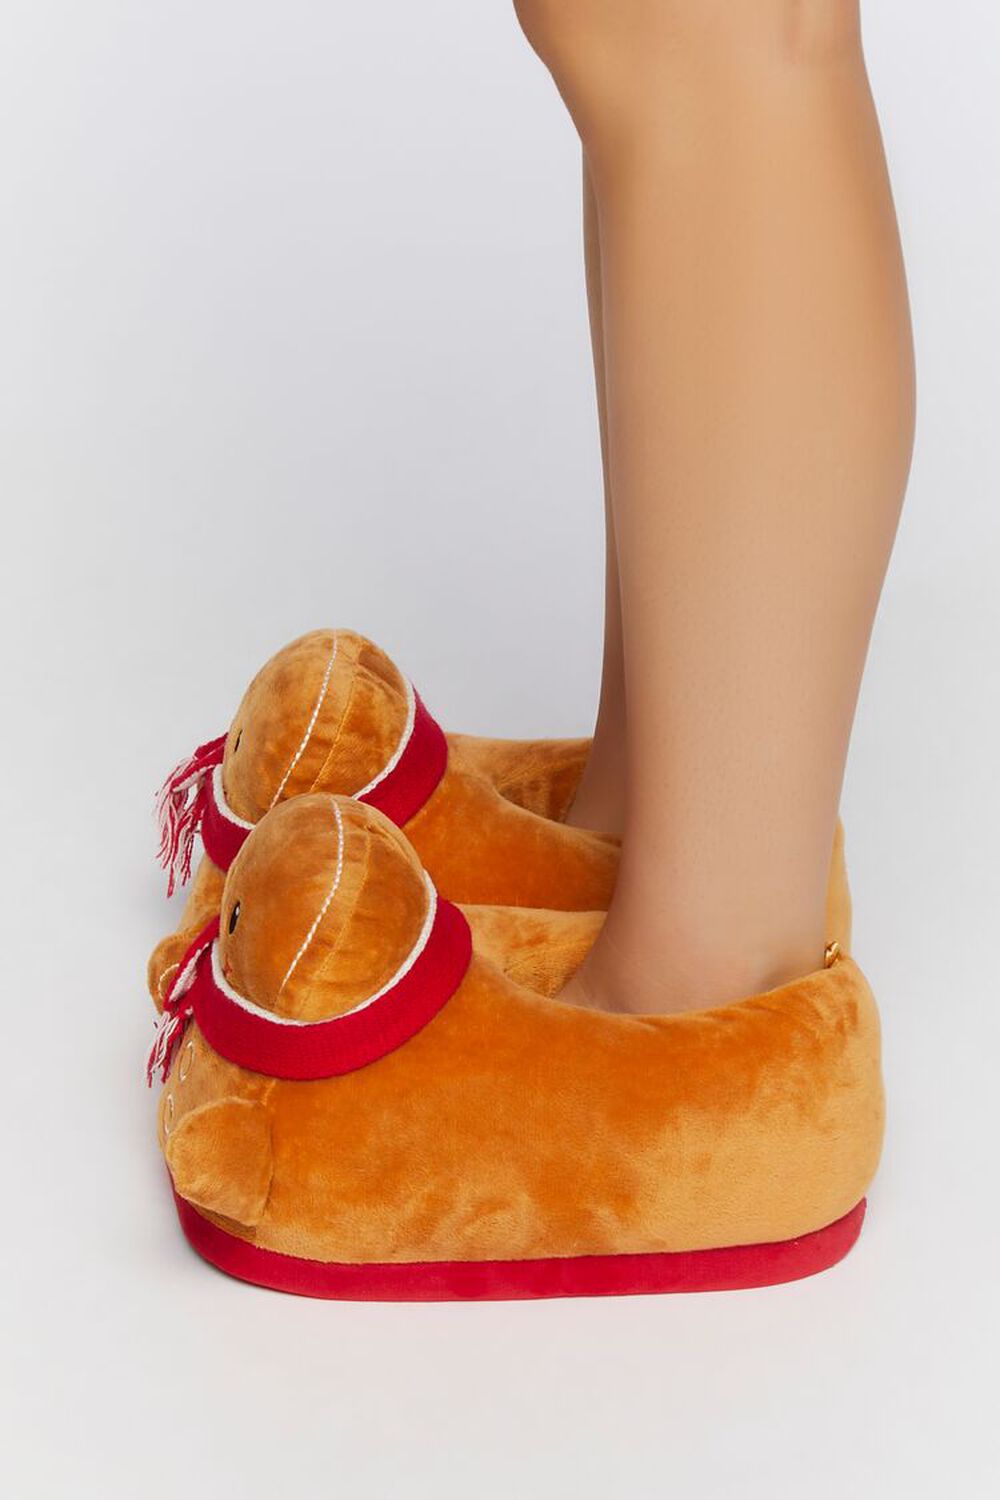 TAN/RED Gingerbread House Slippers, image 2